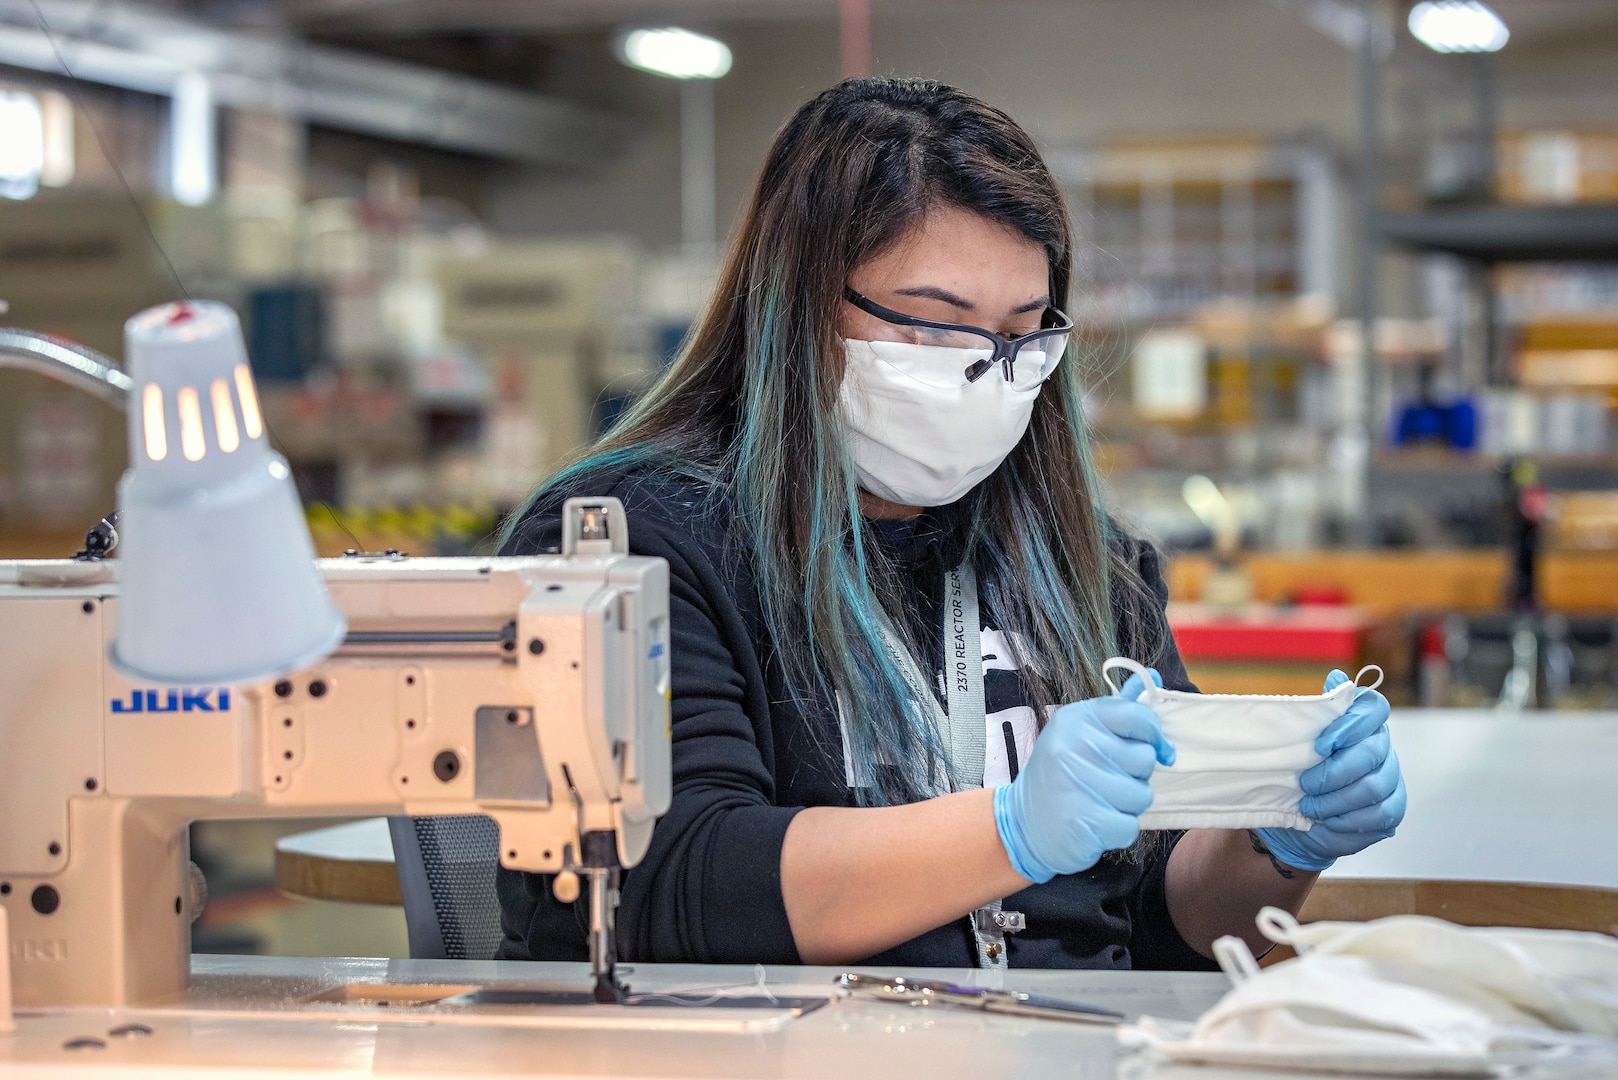 Shop 64 fabric workers at Puget Sound Naval Shipyard & Intermediate Maintenance Facility in Bremerton make cloth masks and polycarbonate face shields that can be used to protect the workforce, or provided to Naval Hospital Bremerton and local hospitals if the need arises.